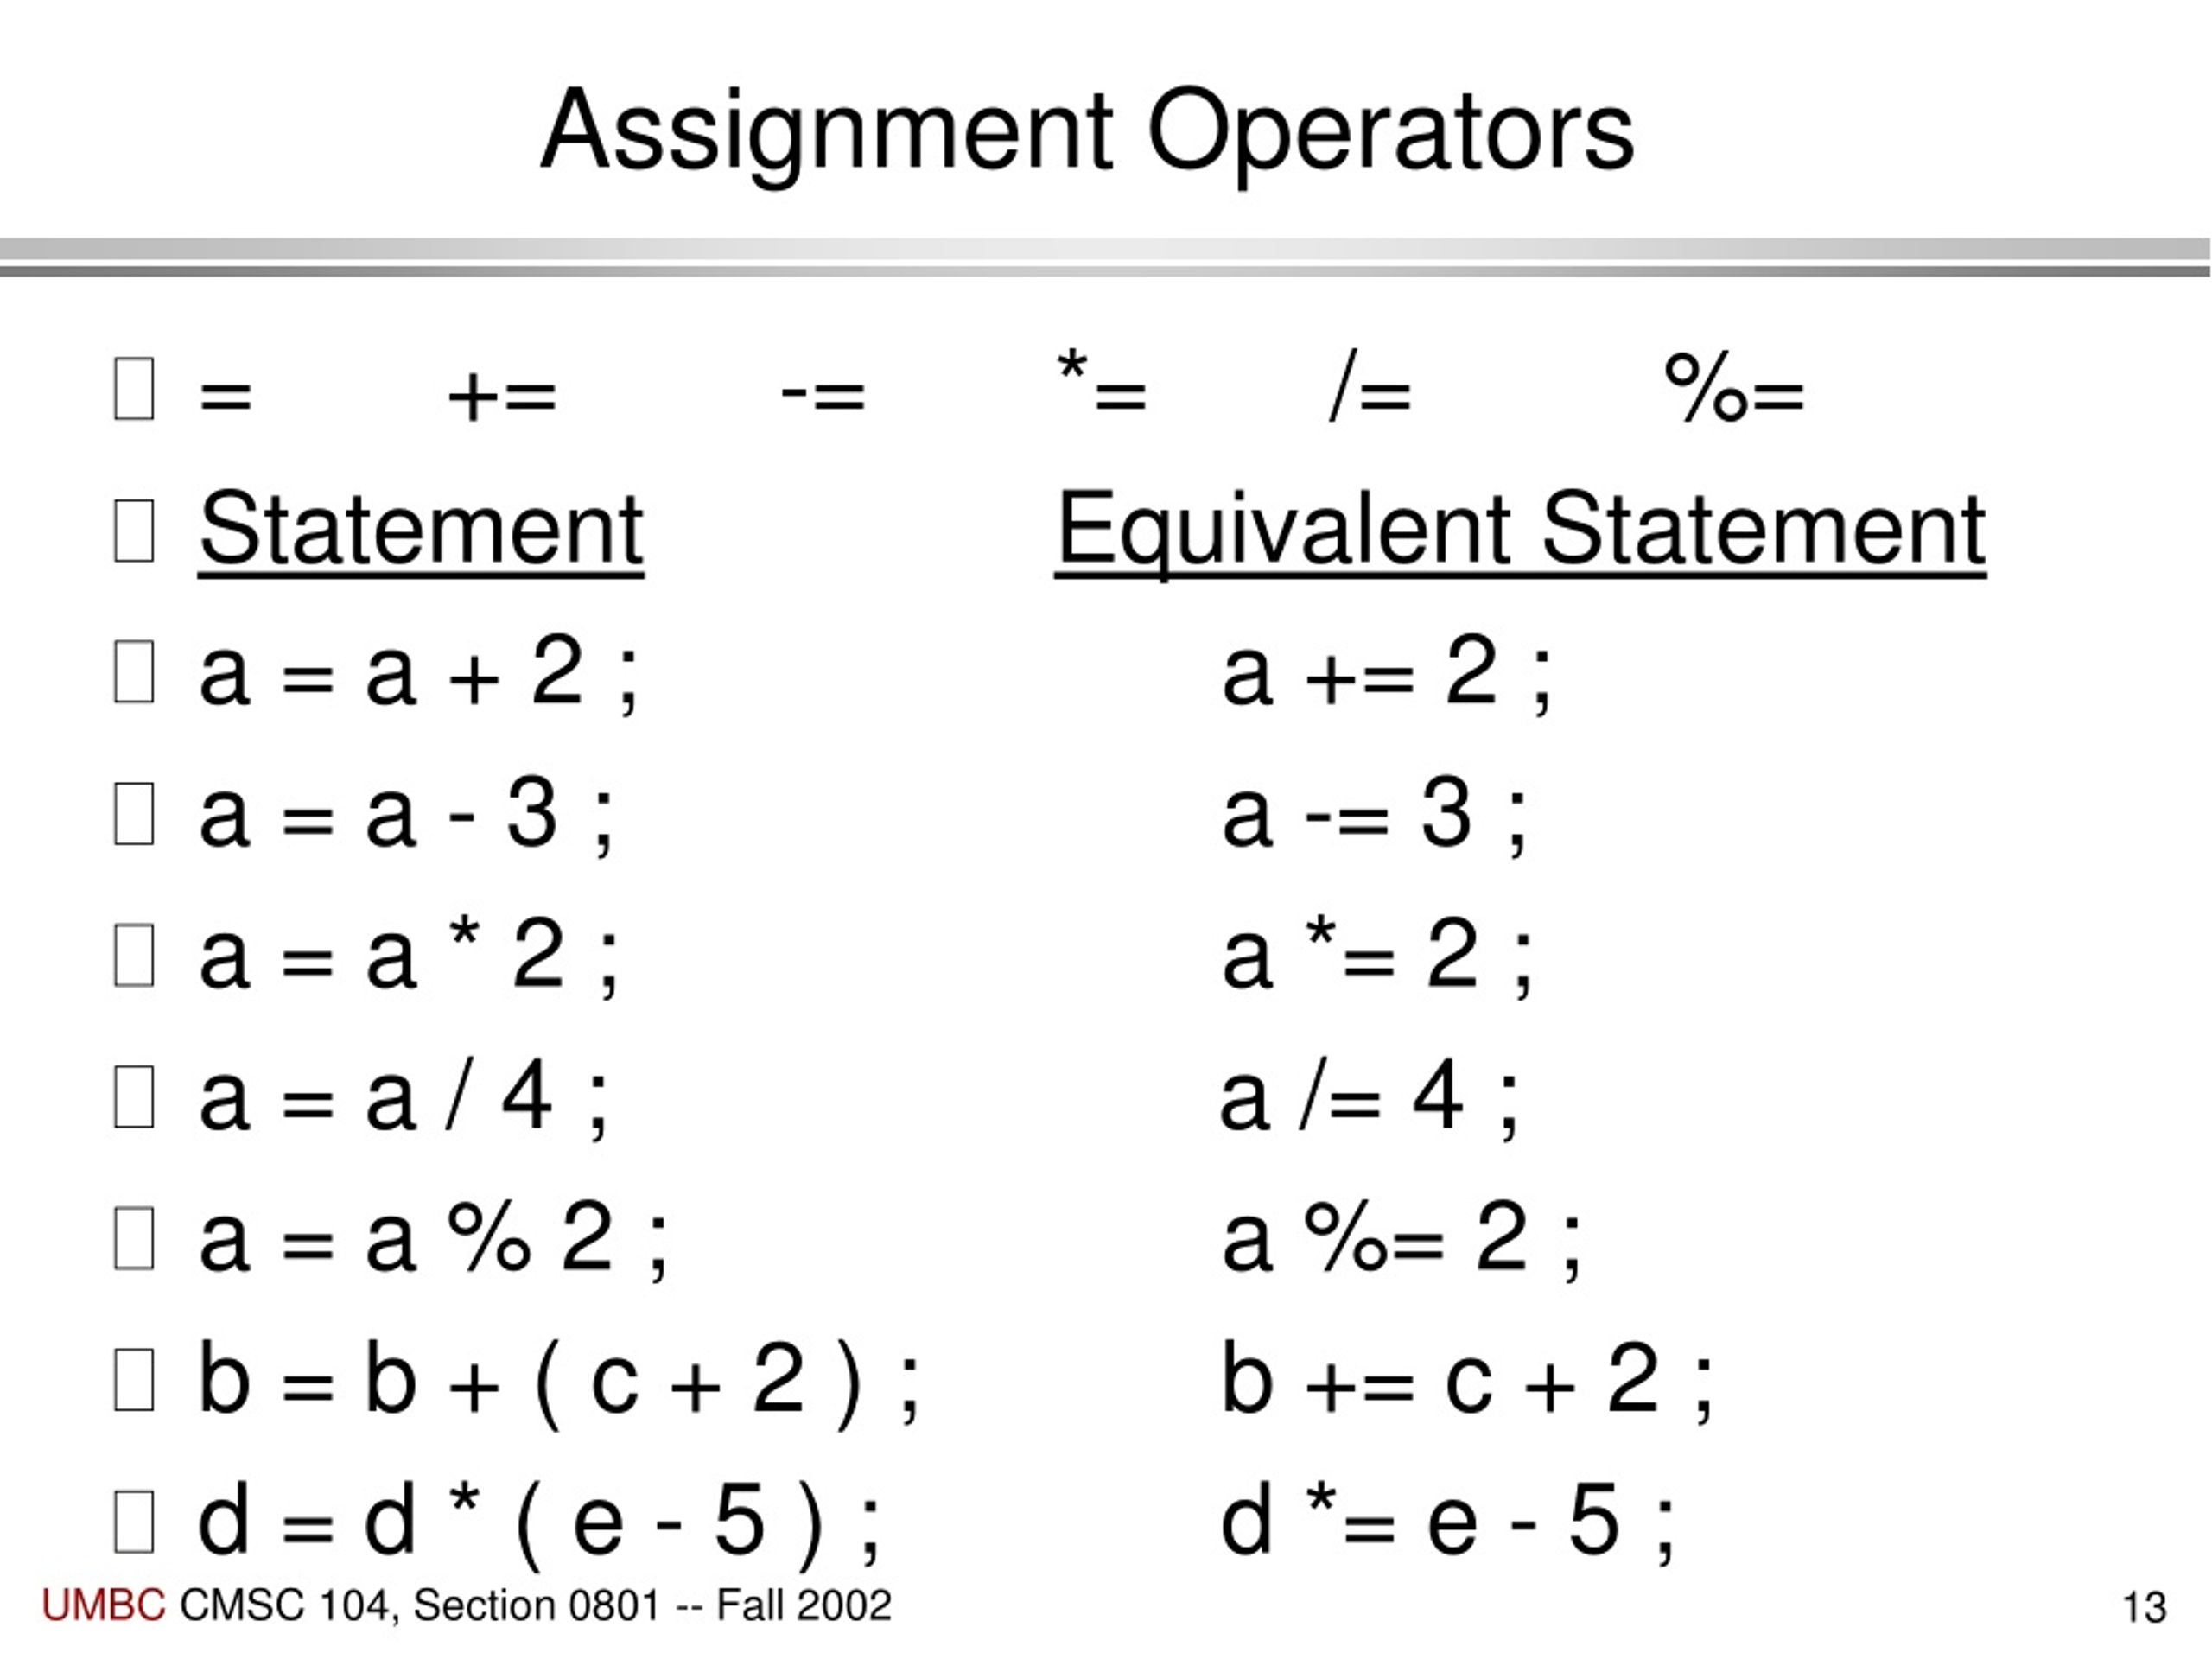 multiple assignment operators specified